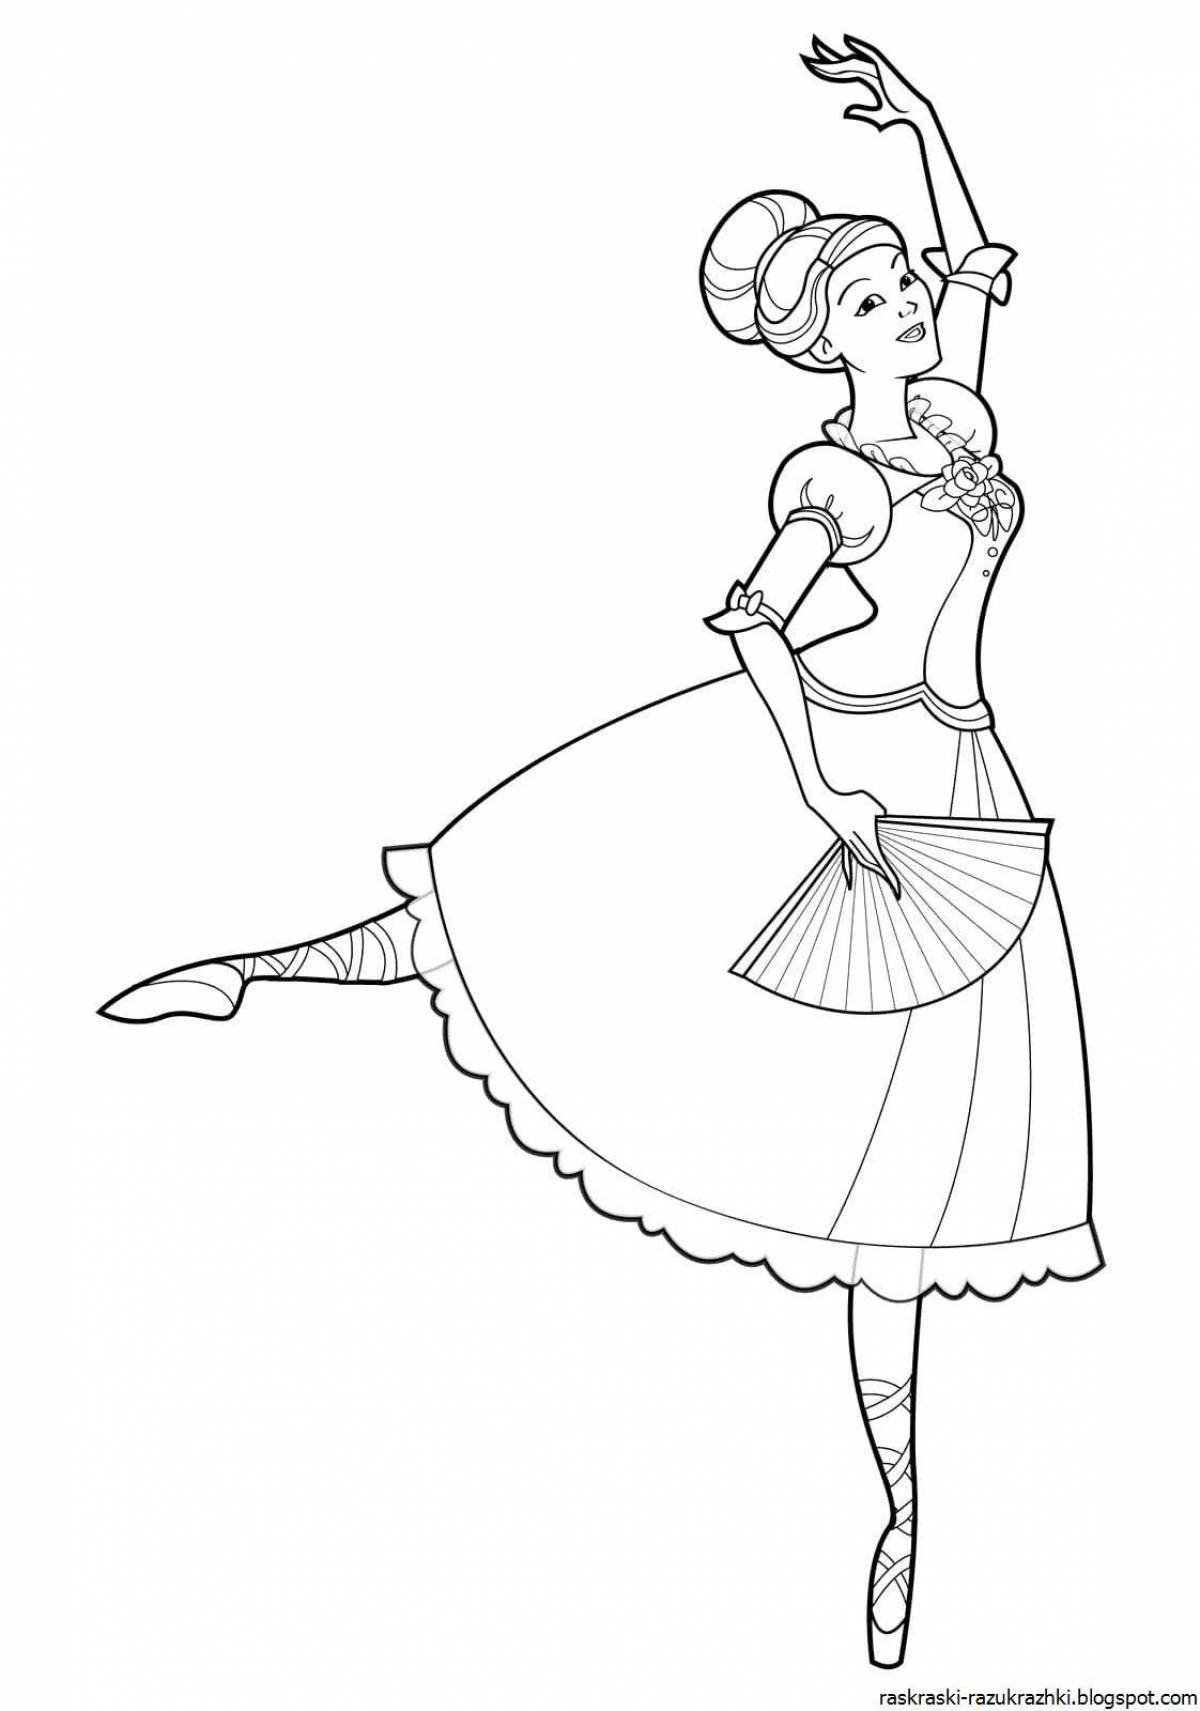 Exquisite ballerina coloring pages for kids